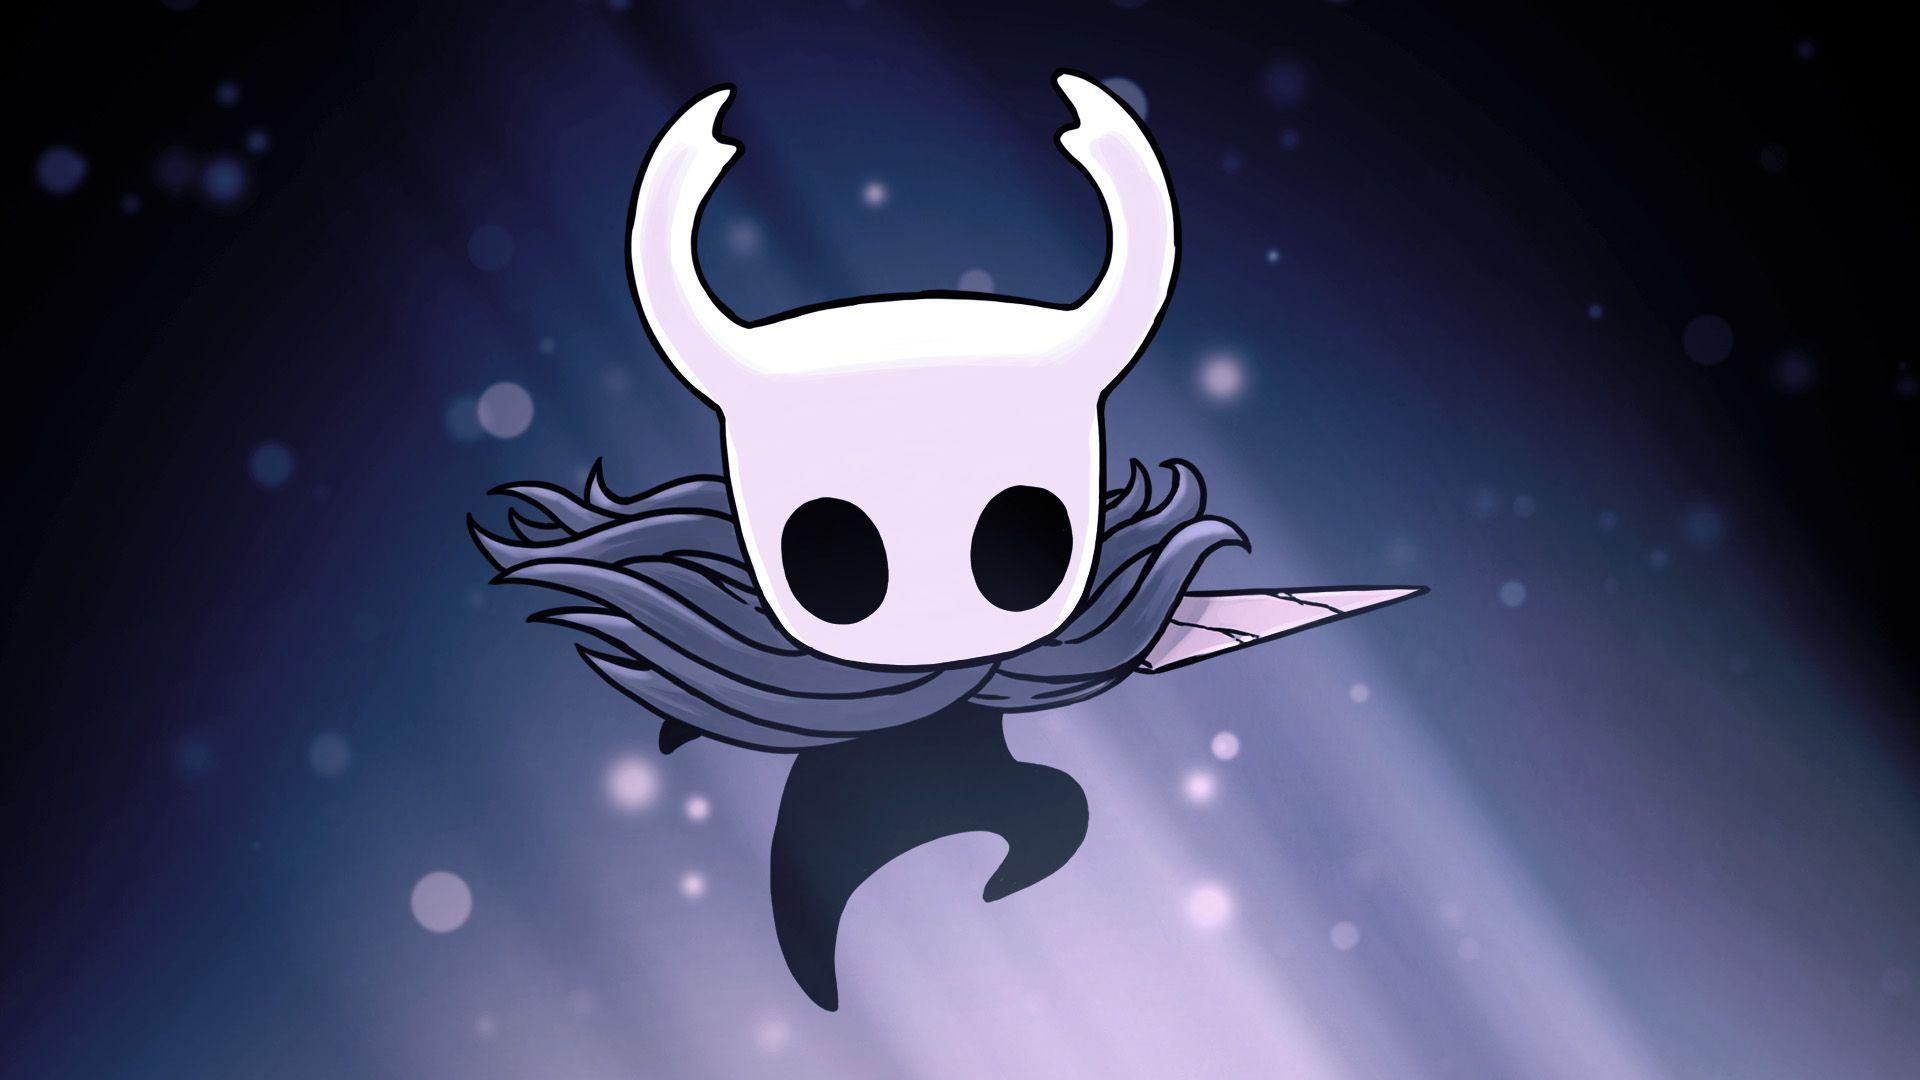 hollow knight download free 2019